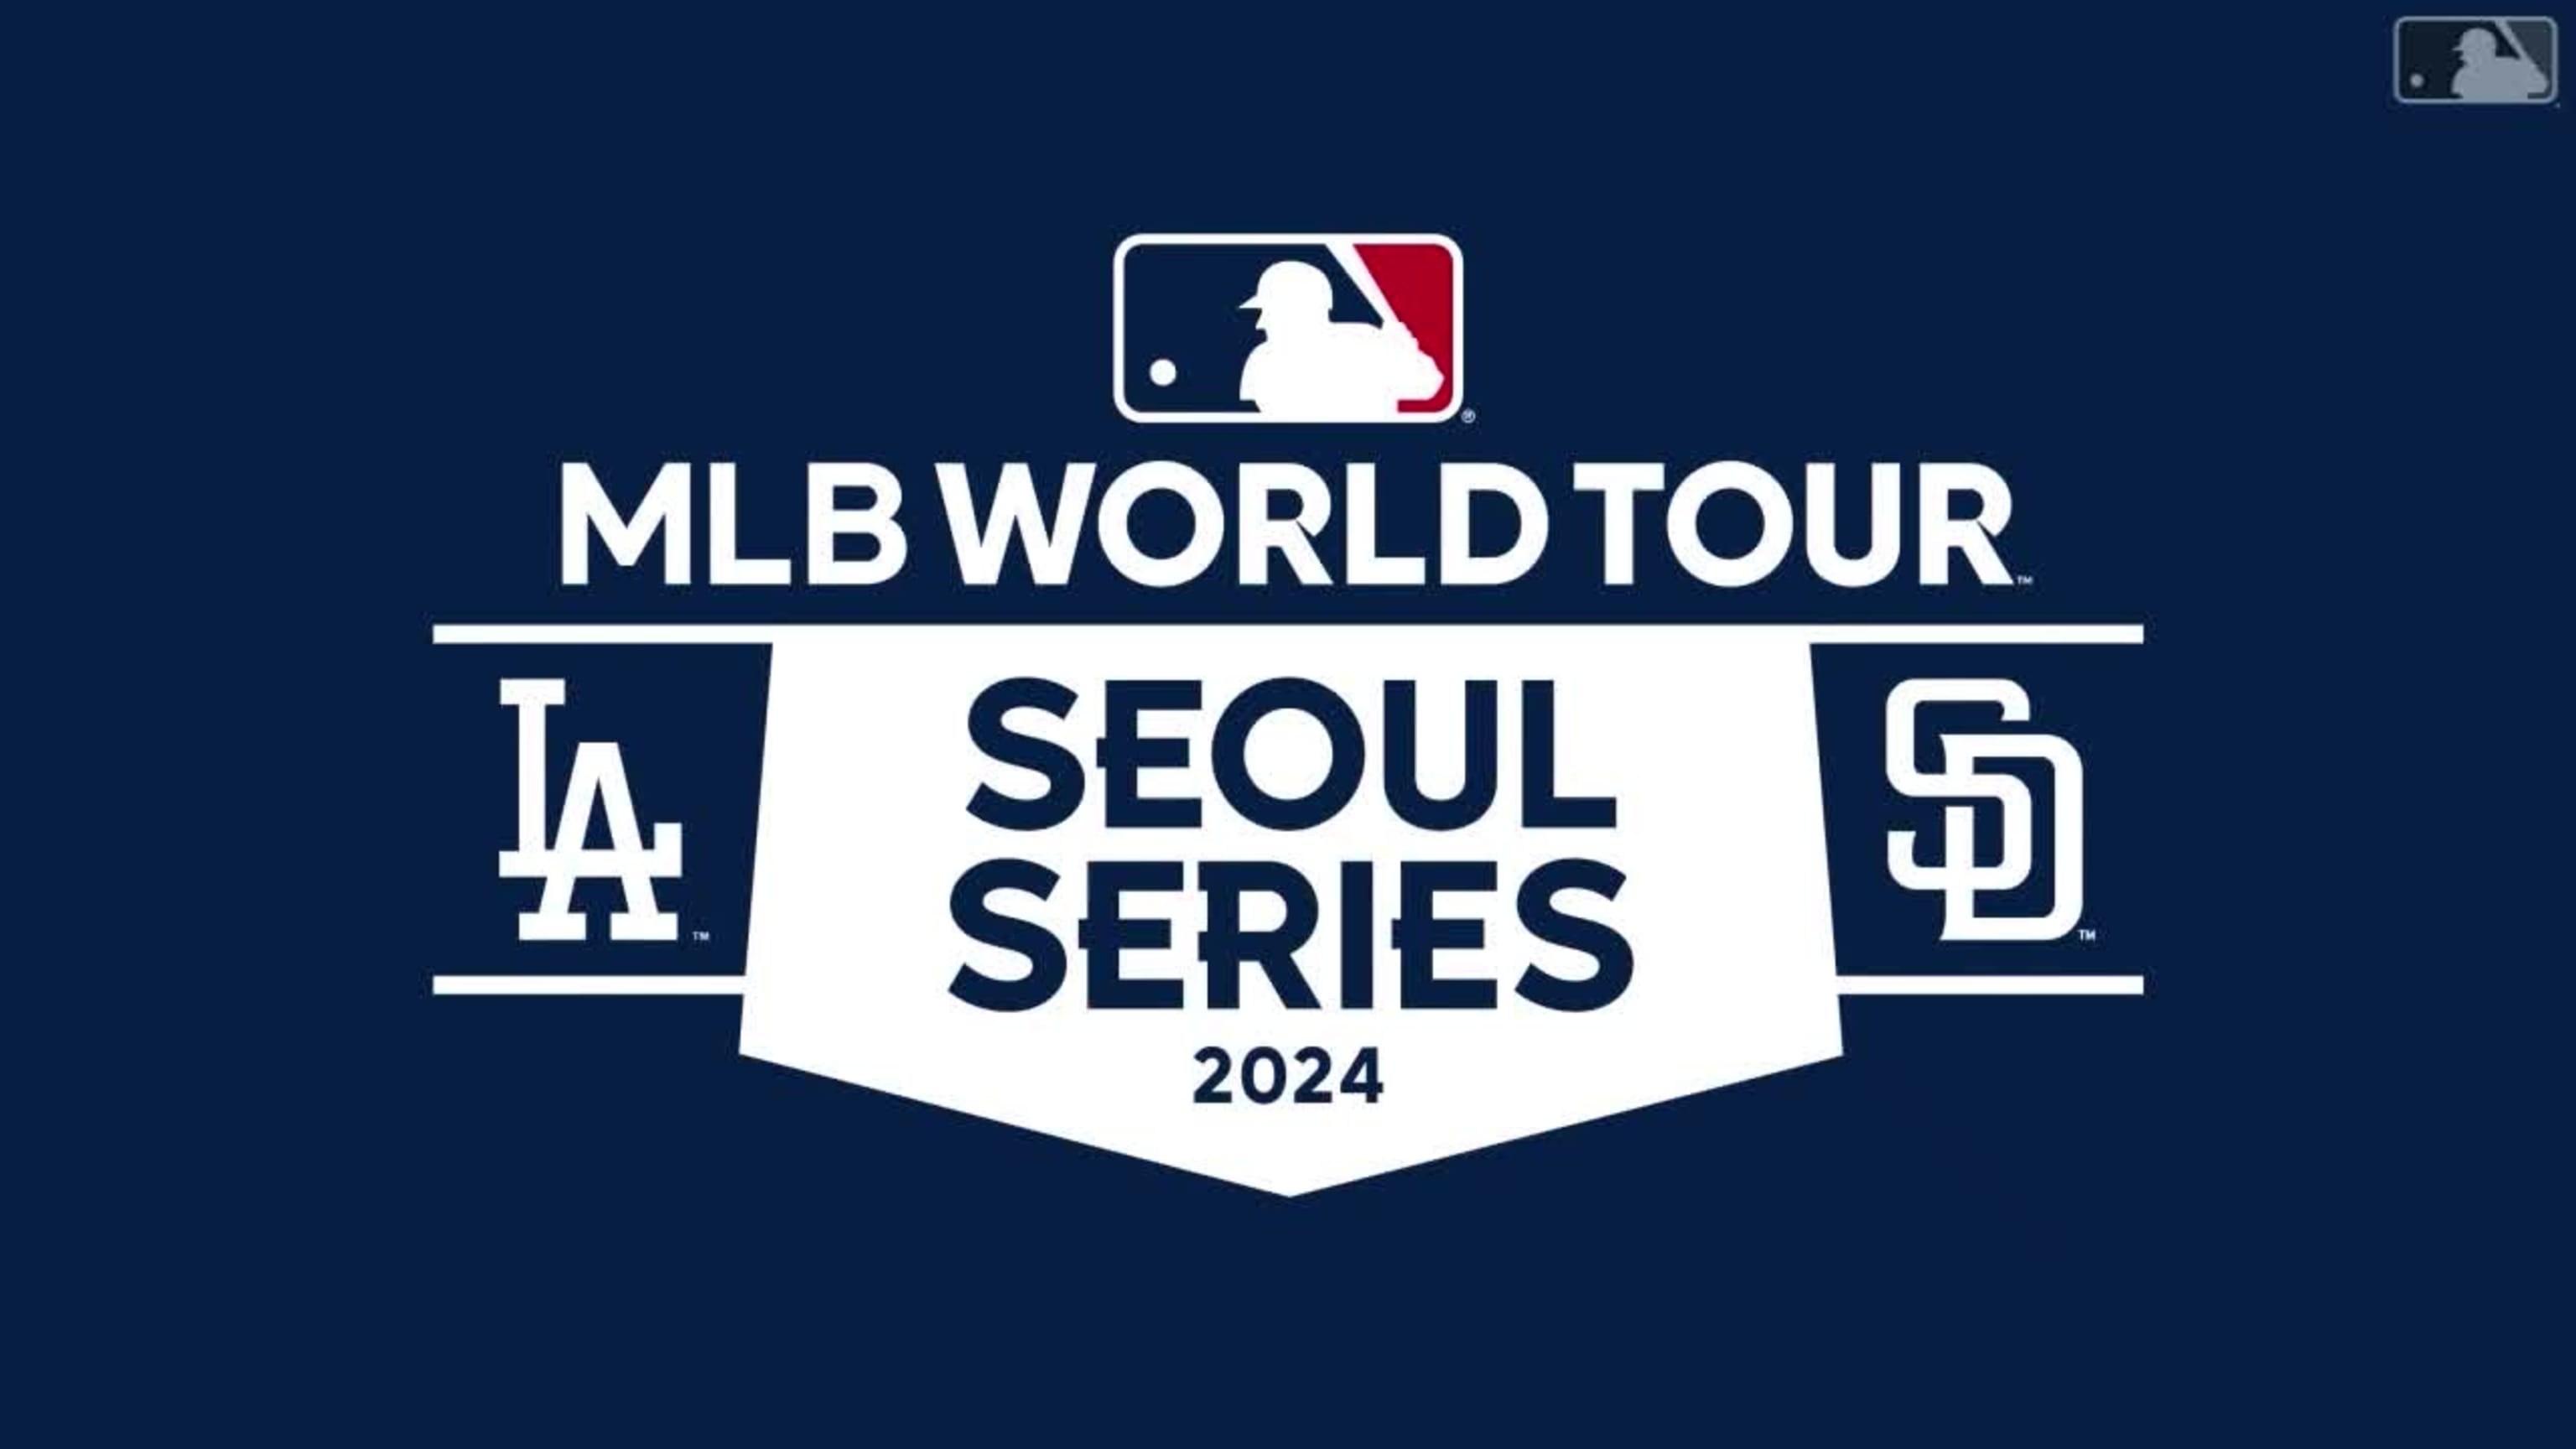 Dodgers vs Padres South Korea: Tickets, schedule, and more for